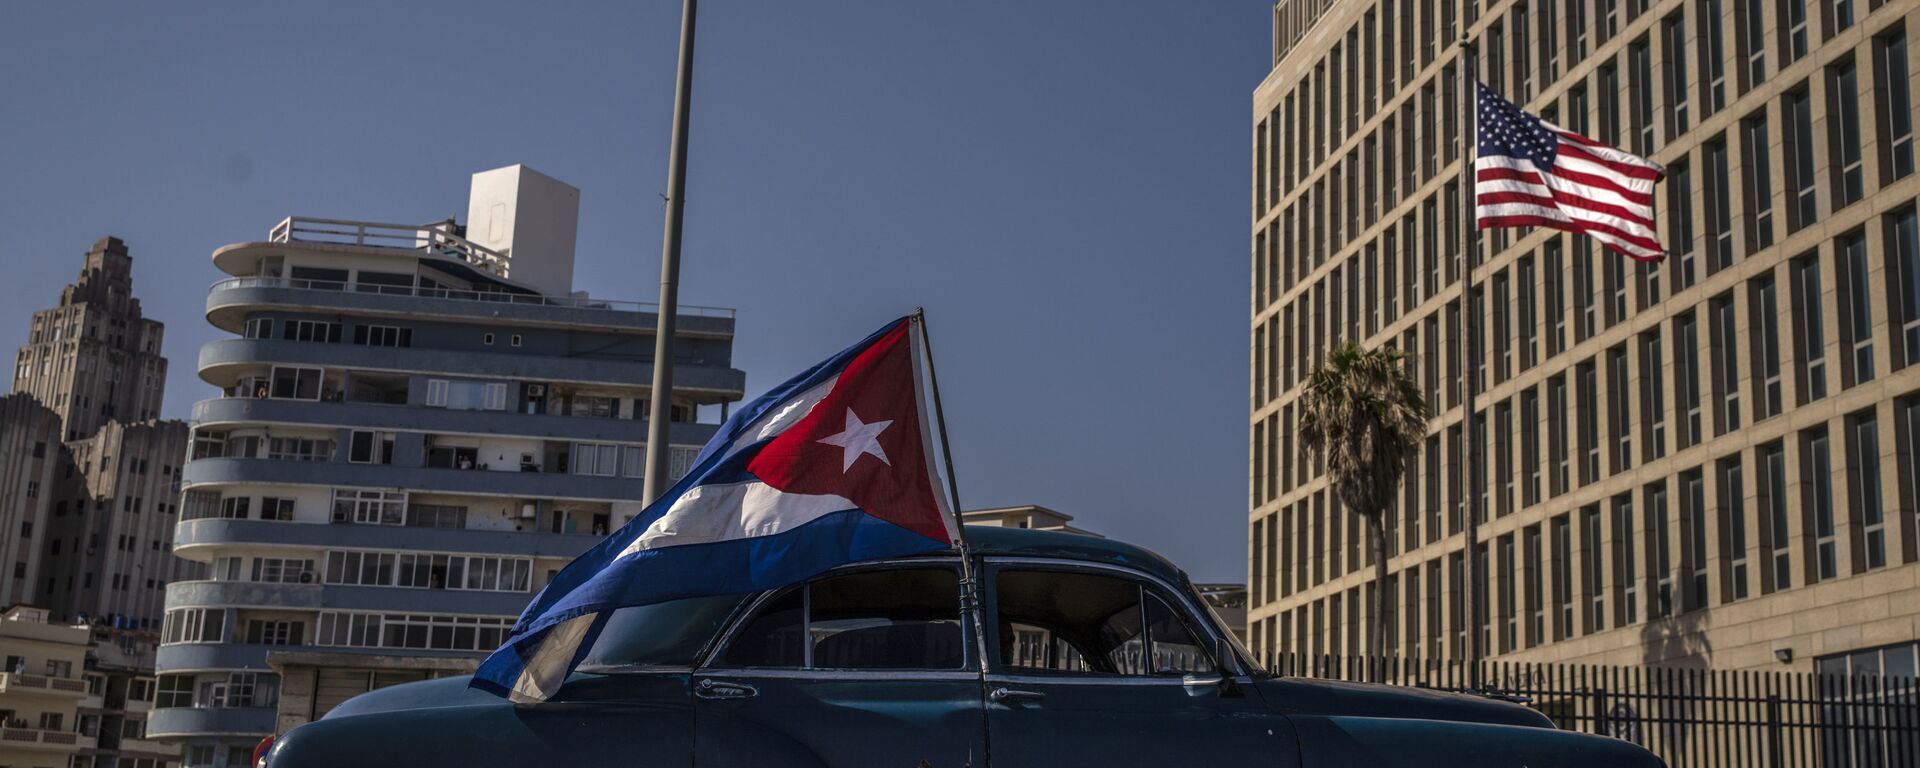 A classic American car flying a Cuban flag drives past the American embassy during a rally calling for the end of the US blockade against the island nation, in Havana, Cuba, Sunday, March 28, 2021. - Sputnik International, 1920, 27.05.2021